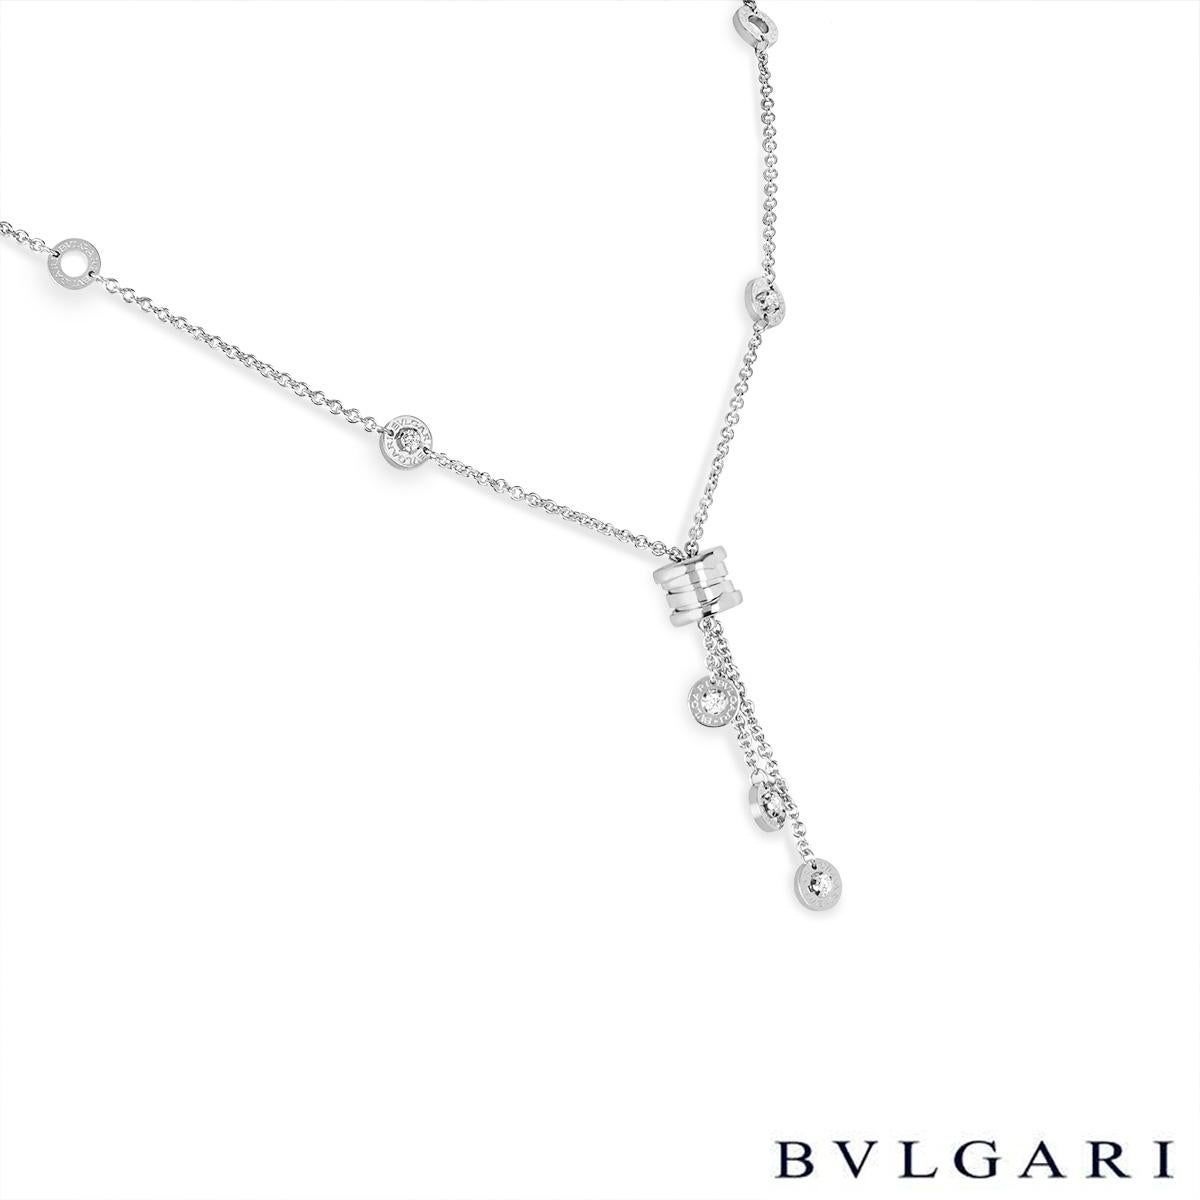 A luxurious 18k white gold Bvlgari diamond necklace from the B.Zero1 collection. The necklace comprises of the iconic B.Zero1 motif with 3 tassels hanging freely. Each tassel has a circular motif at the end with a round brilliant cut diamond set to